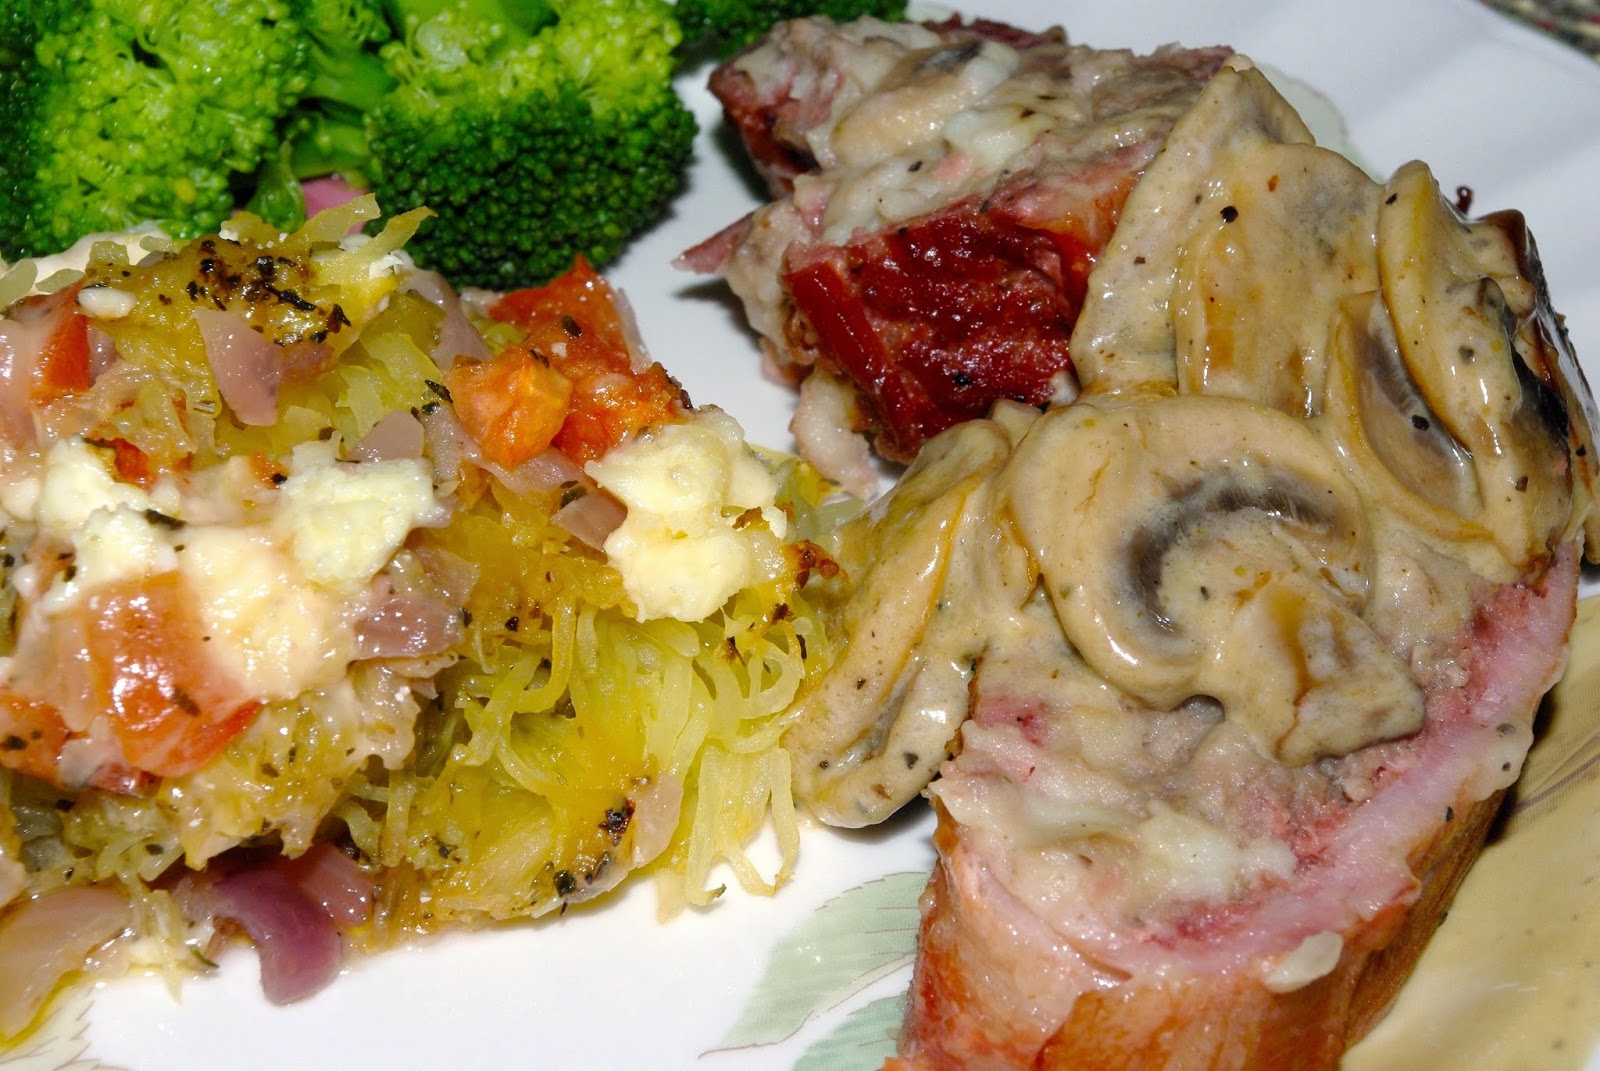  bacon wrapped stuffed meatloaf